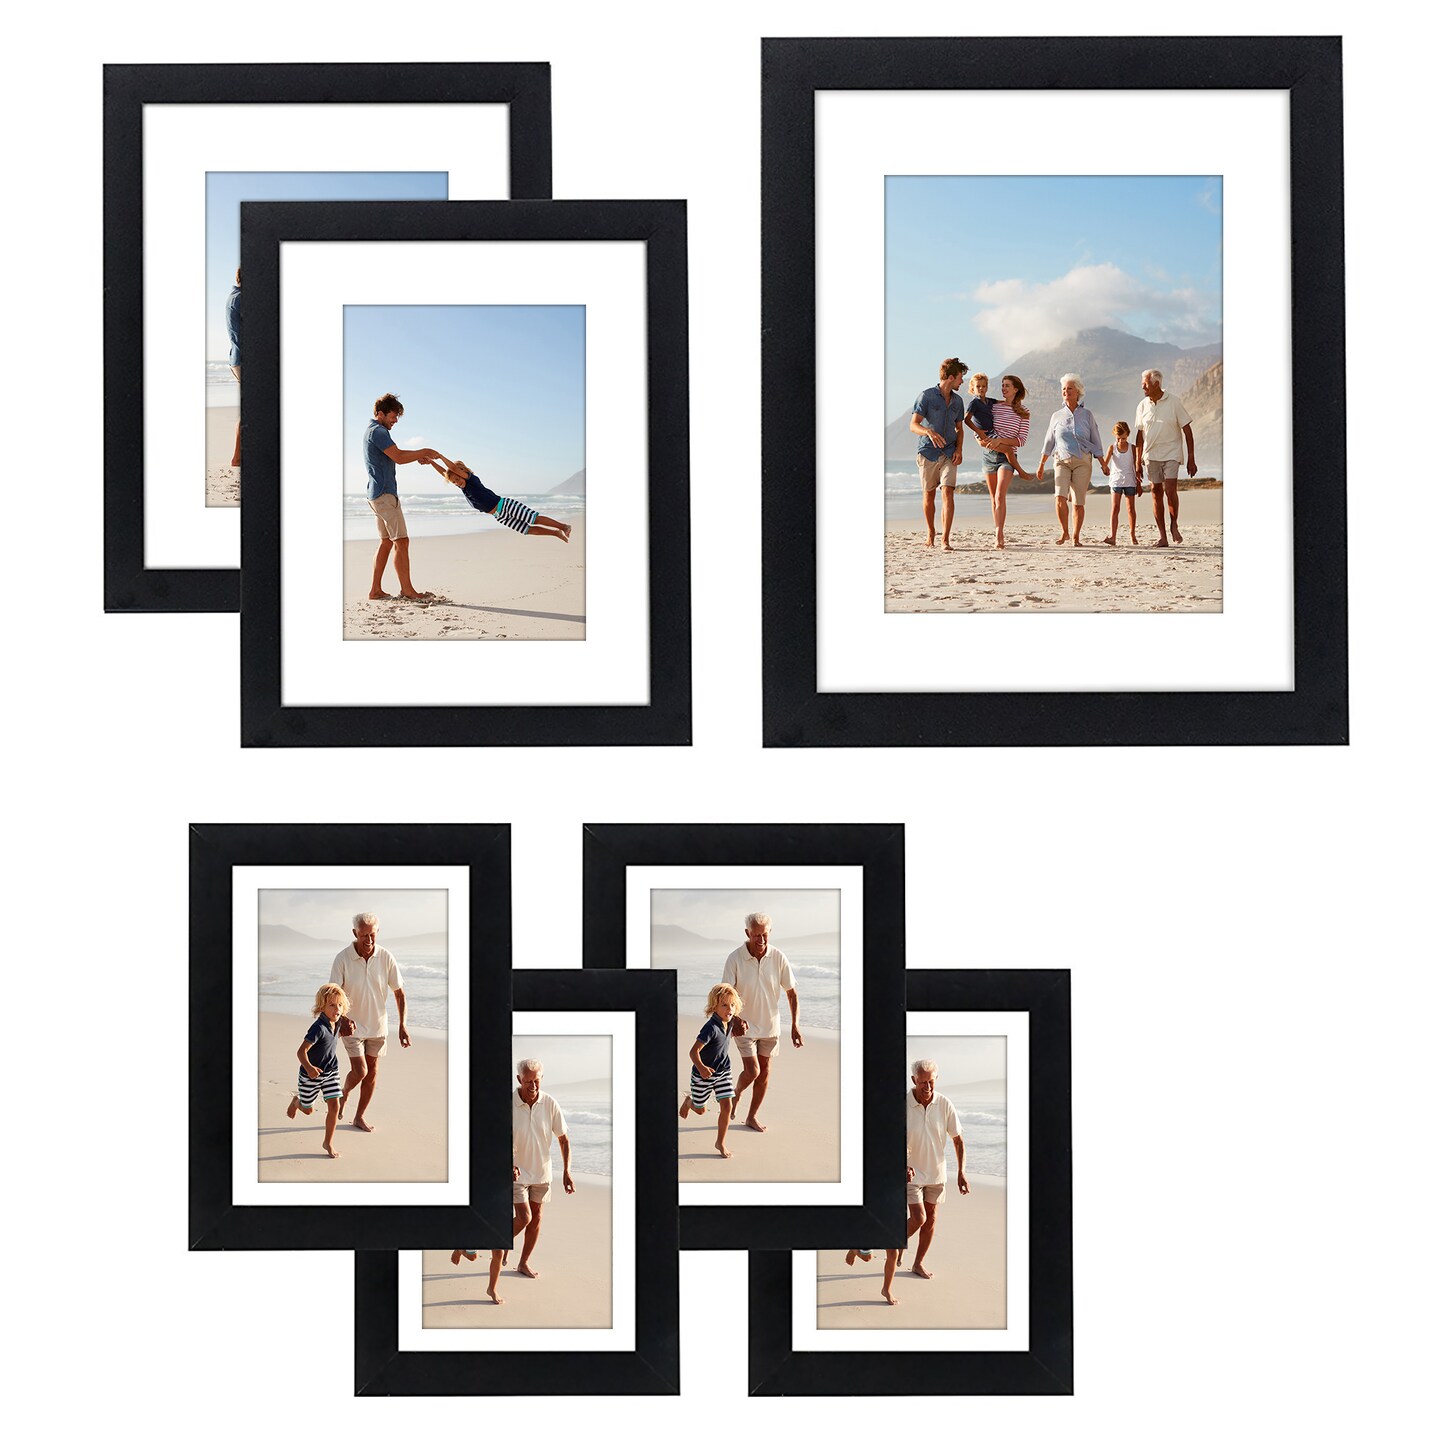 Americanflat 11x14 (1), 8x10 (2), 5x7 (4) Gallery Wall Frame Set - Set of 7 - Collage Wall Art Decor - Shatter Resistant Glass - Adjustable Hanging Hardware - Includes Easels